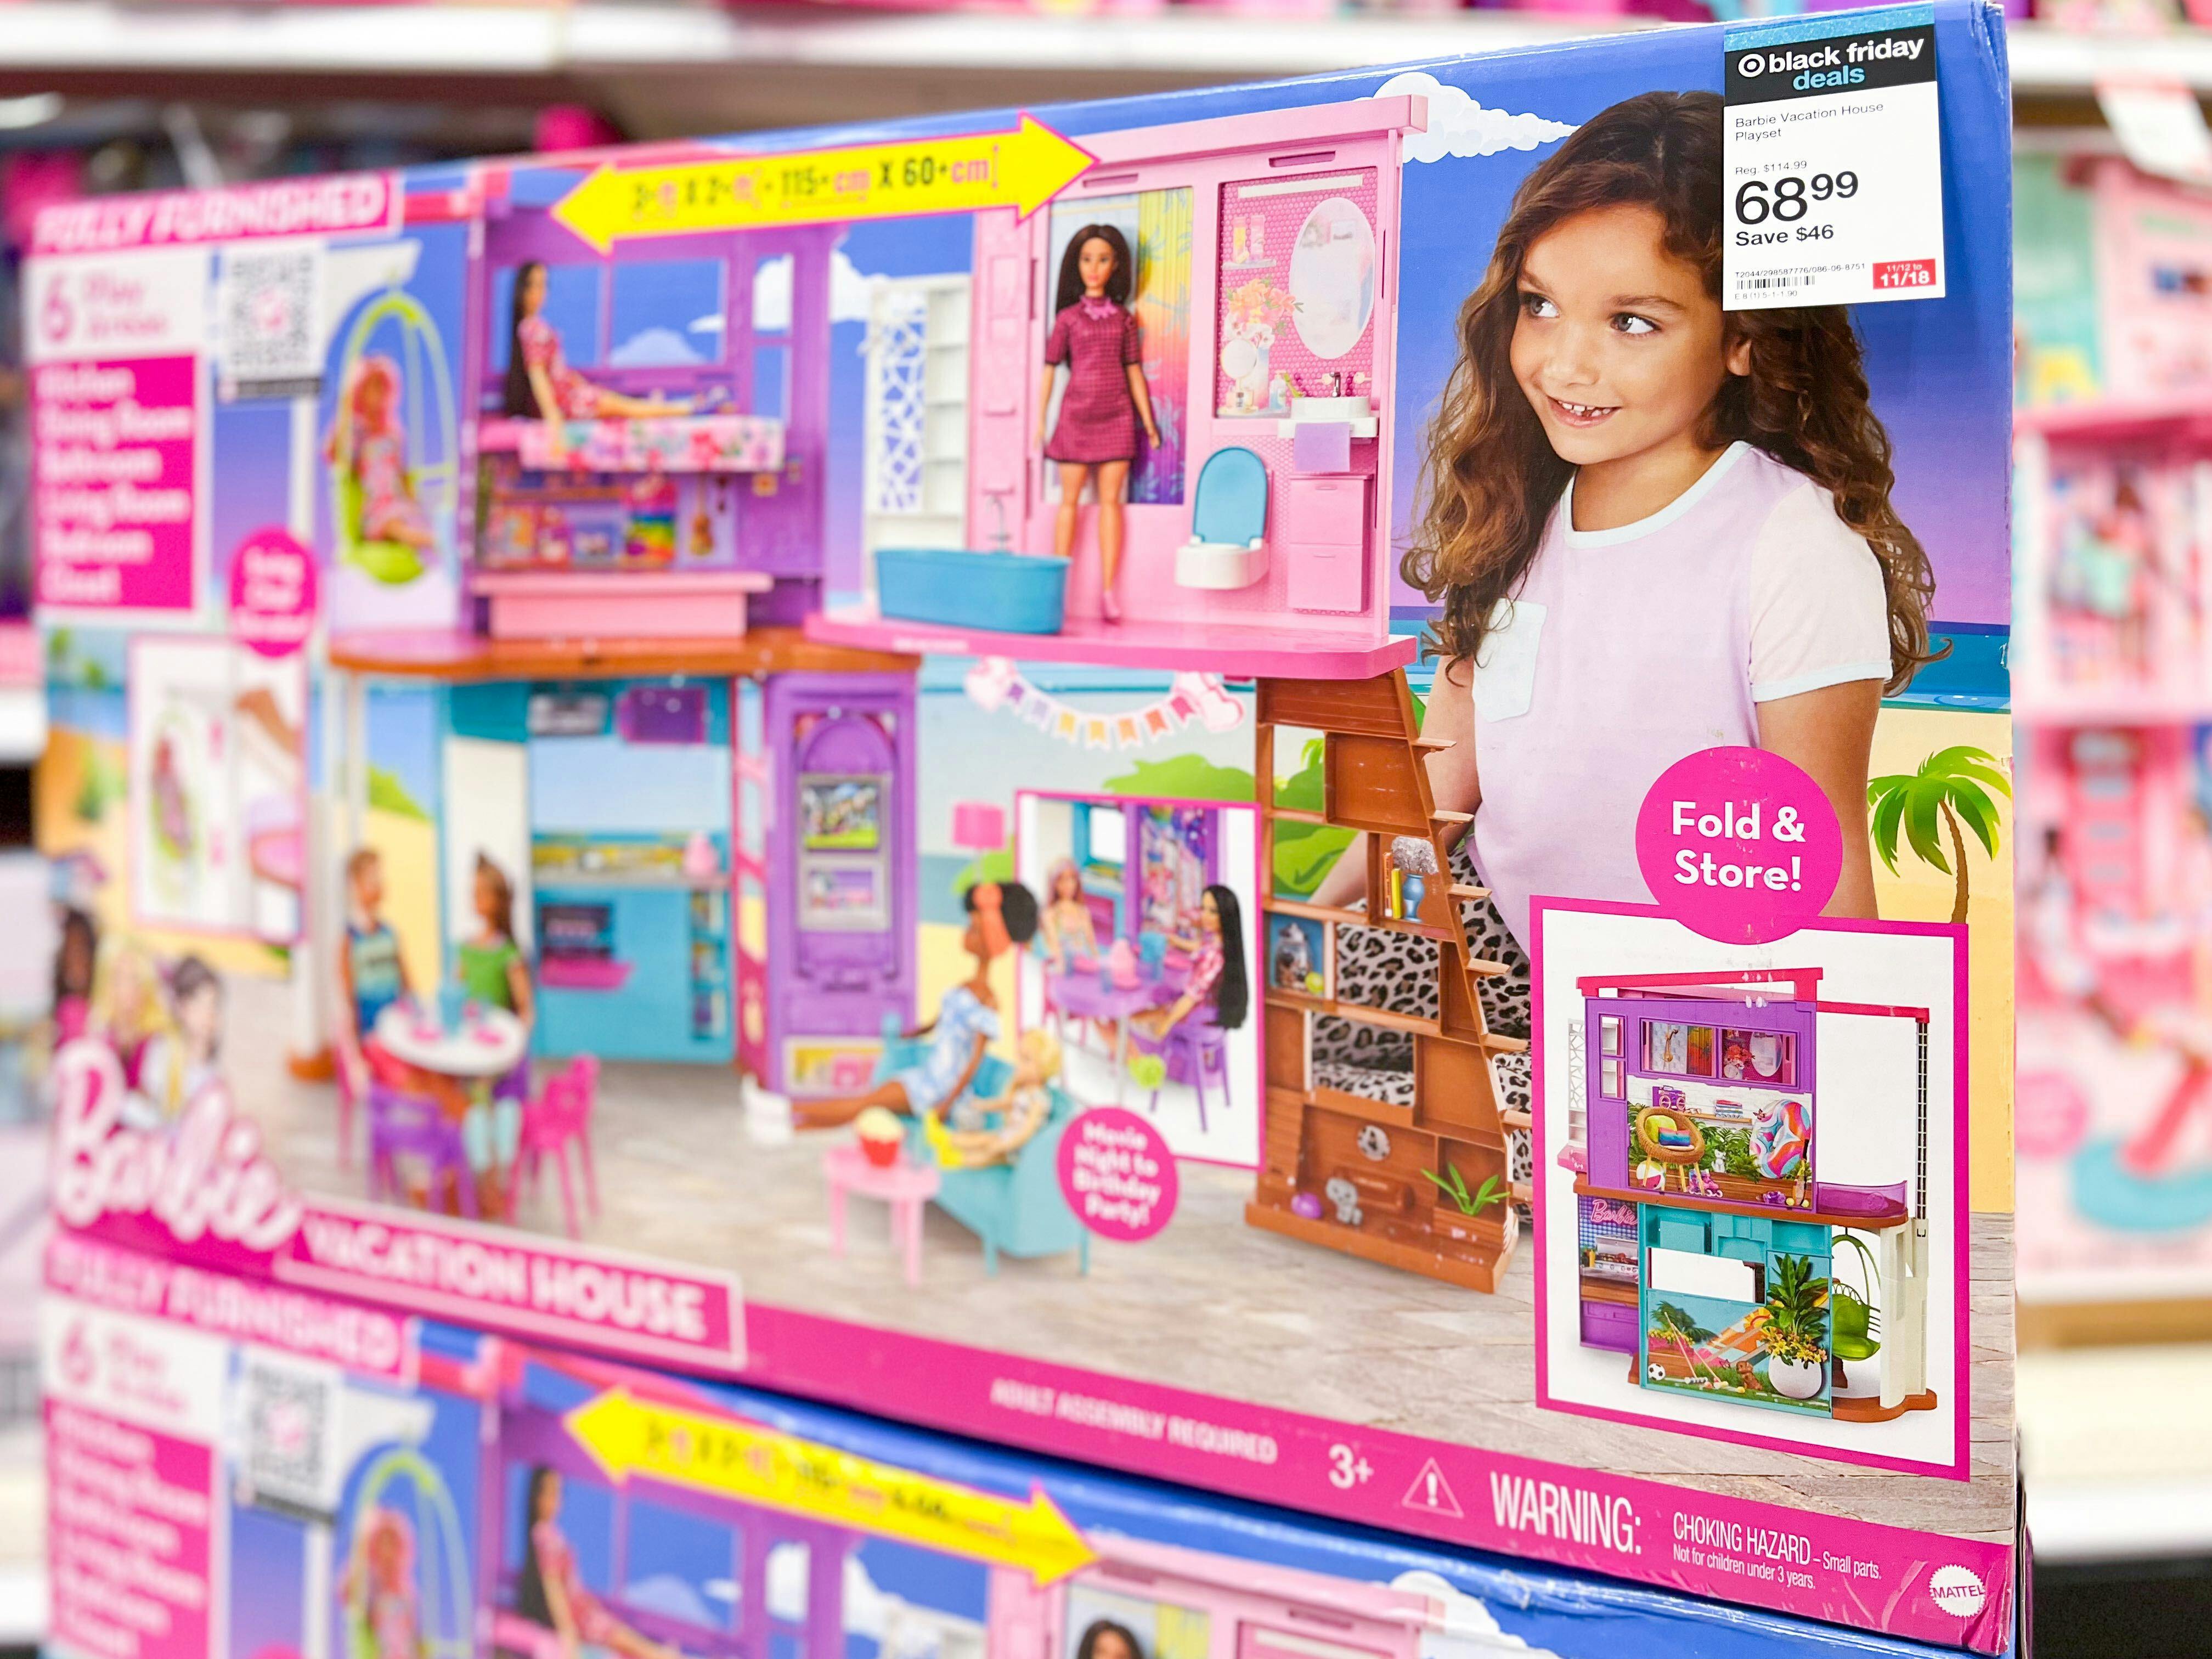 Barbie Vacation House Playset